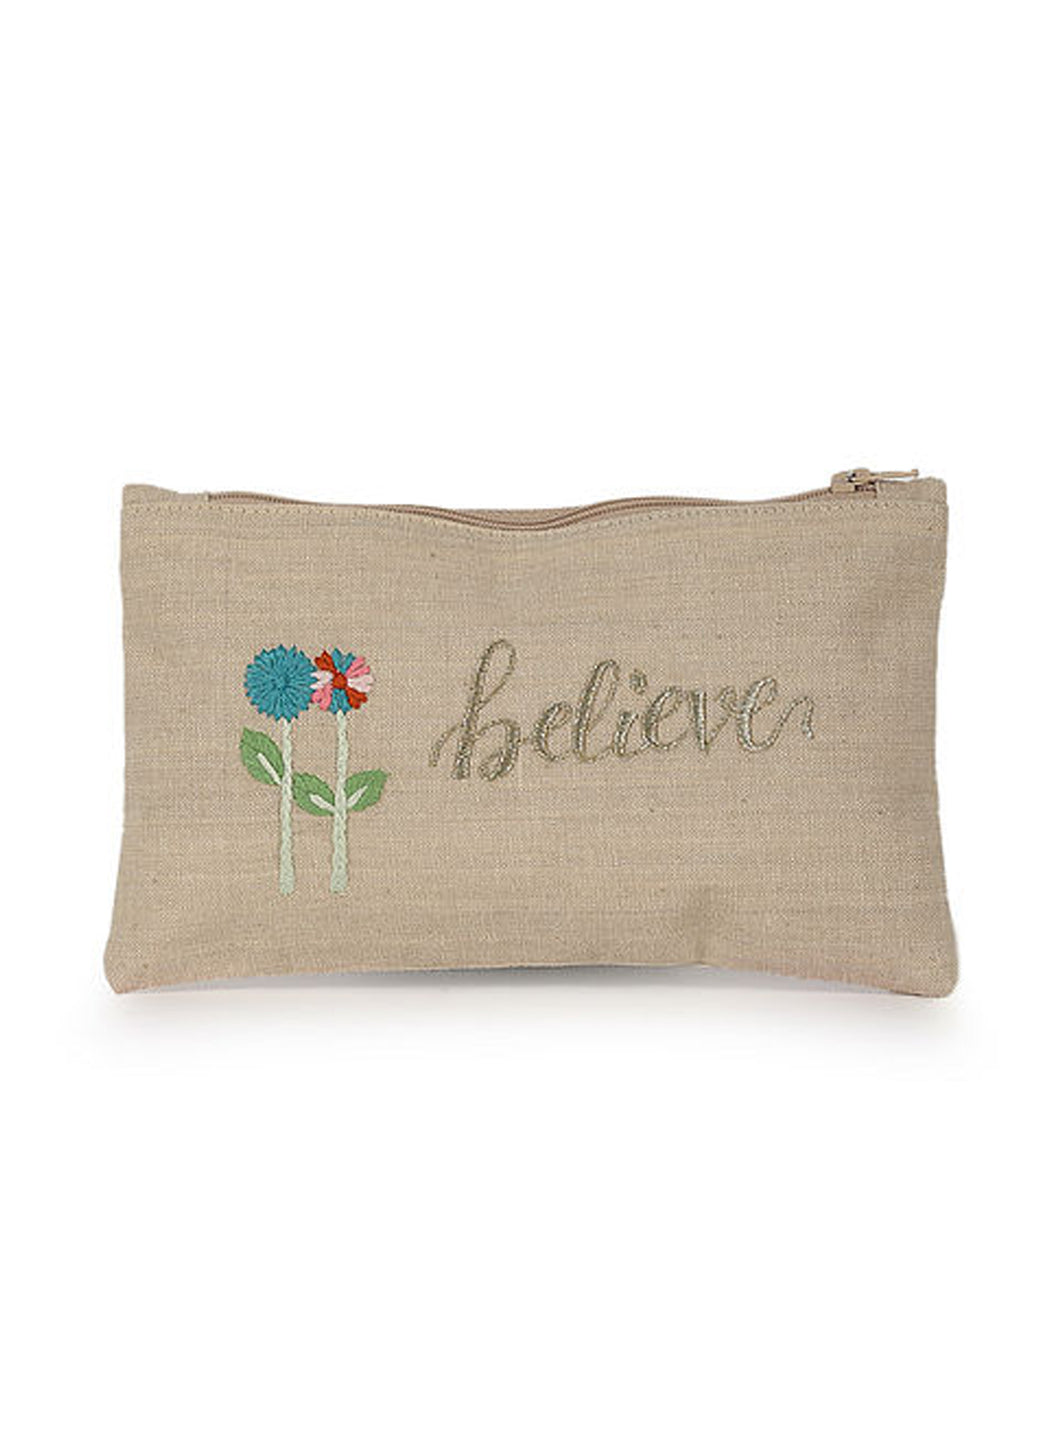 Kanyoga Cotton Pouch With ‘Believe’ Embroidered For Women